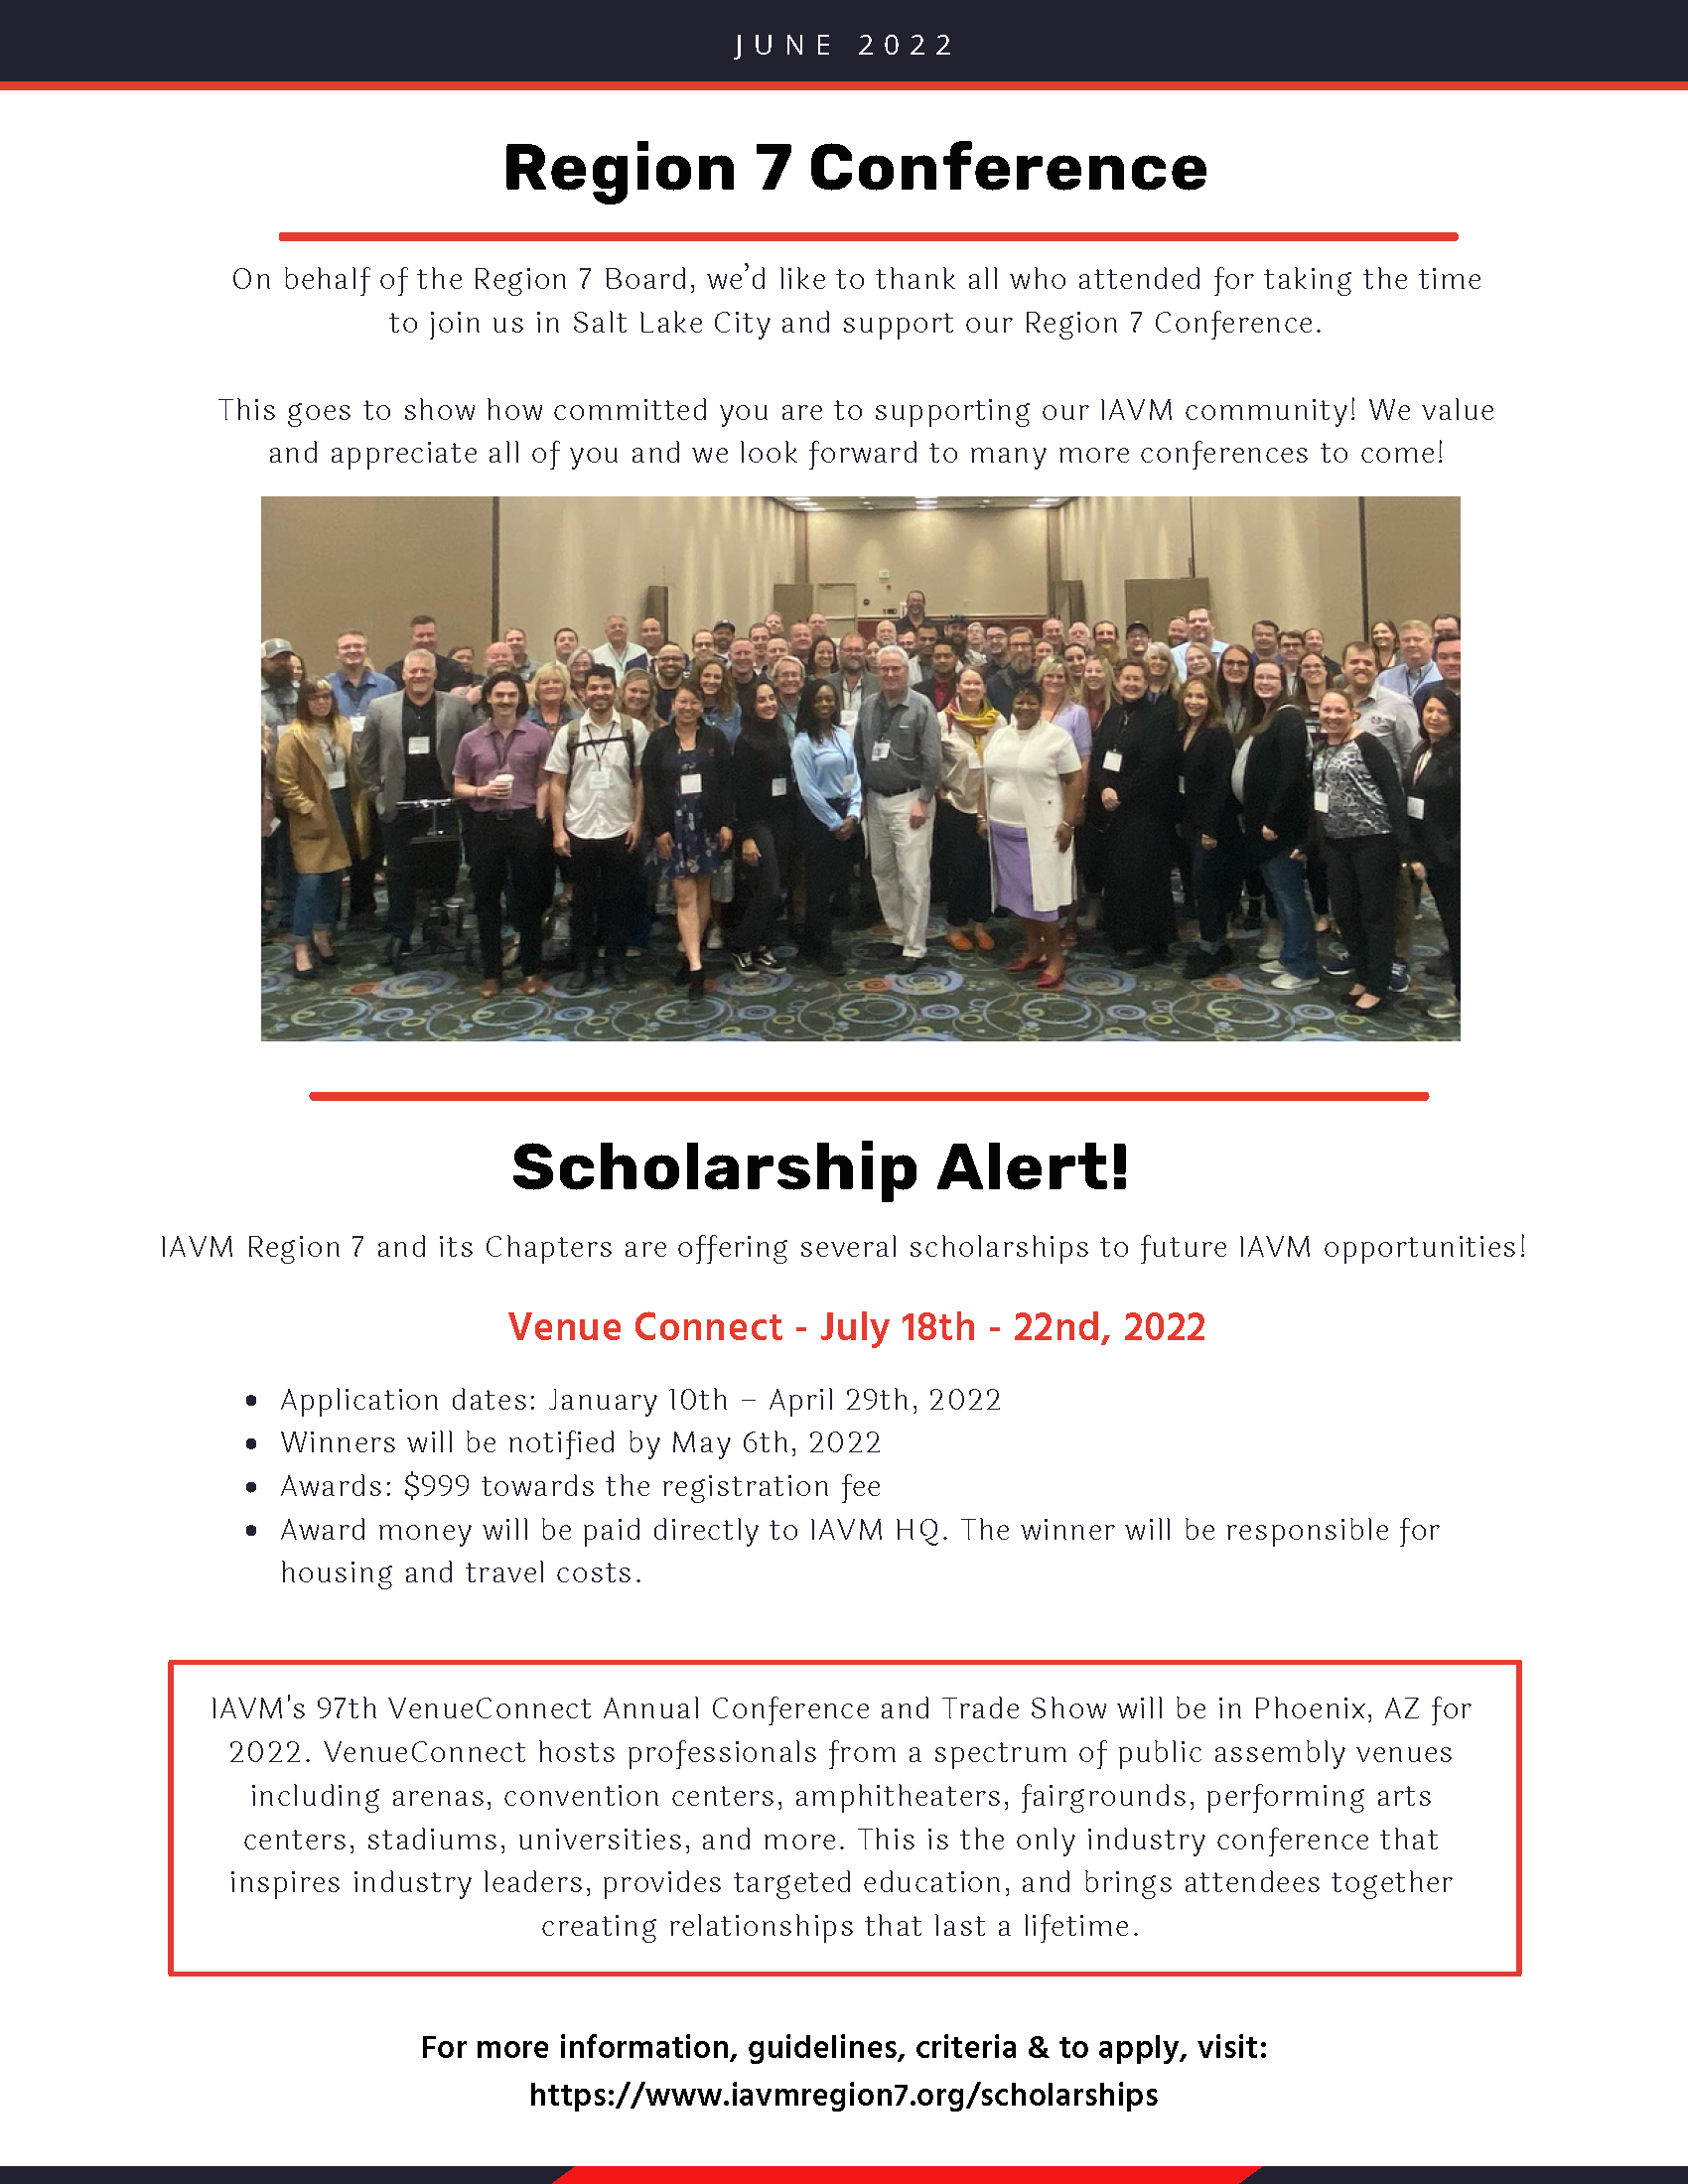 IAVM June Newsletter_Page_2.png